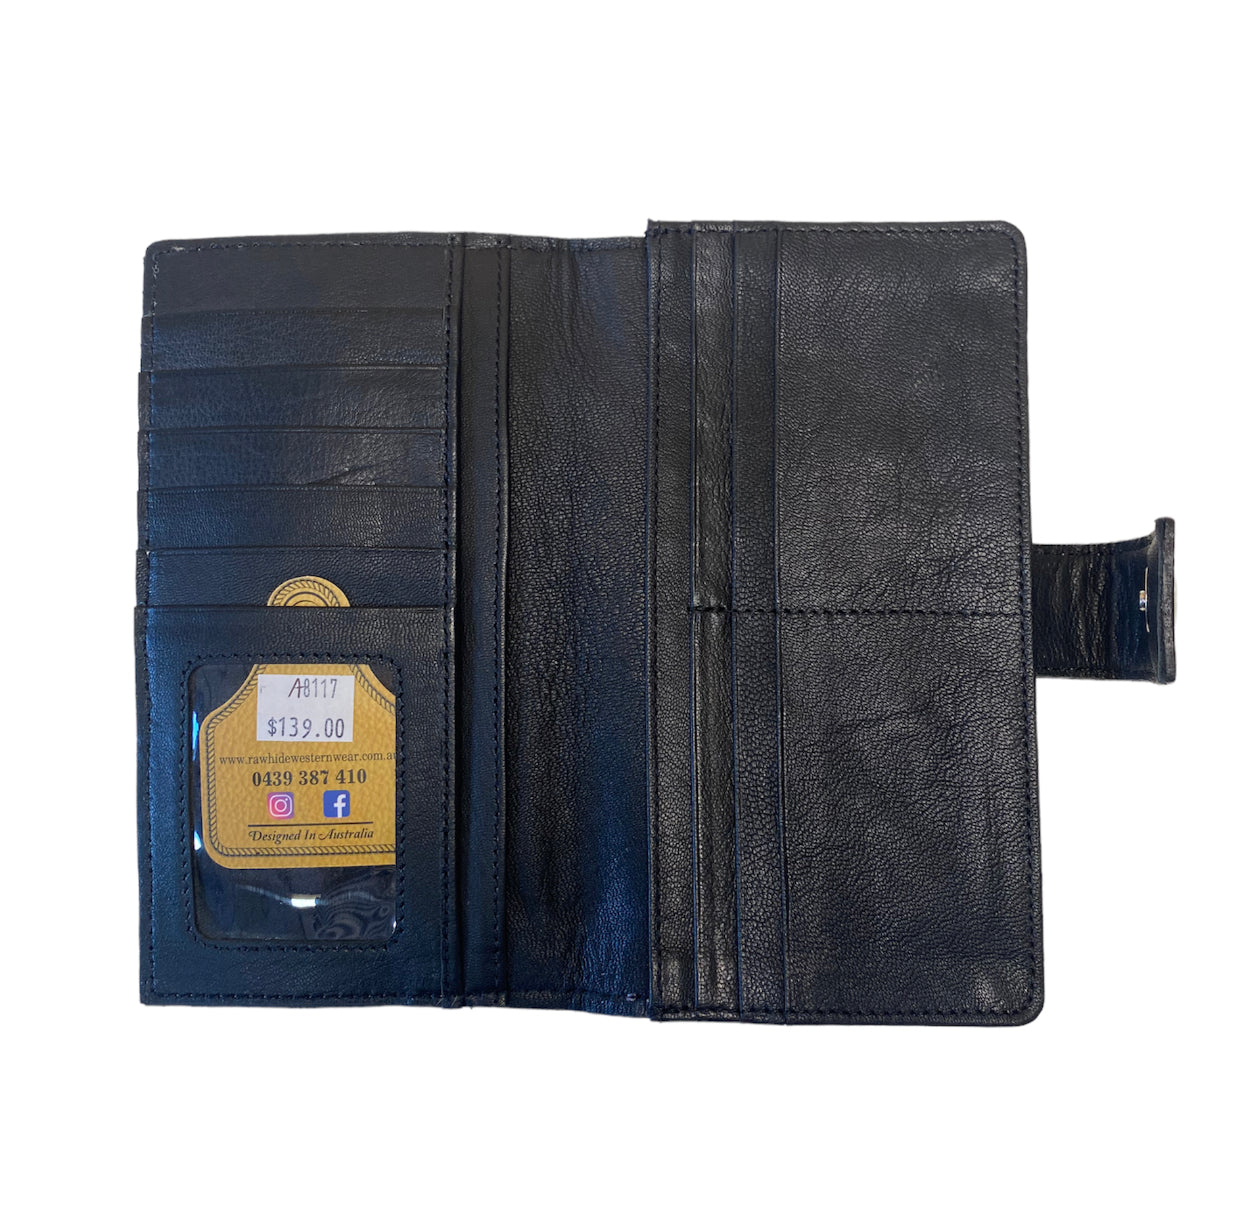 A8231 - Hide 100% Real Leather & Backstitch Wallet